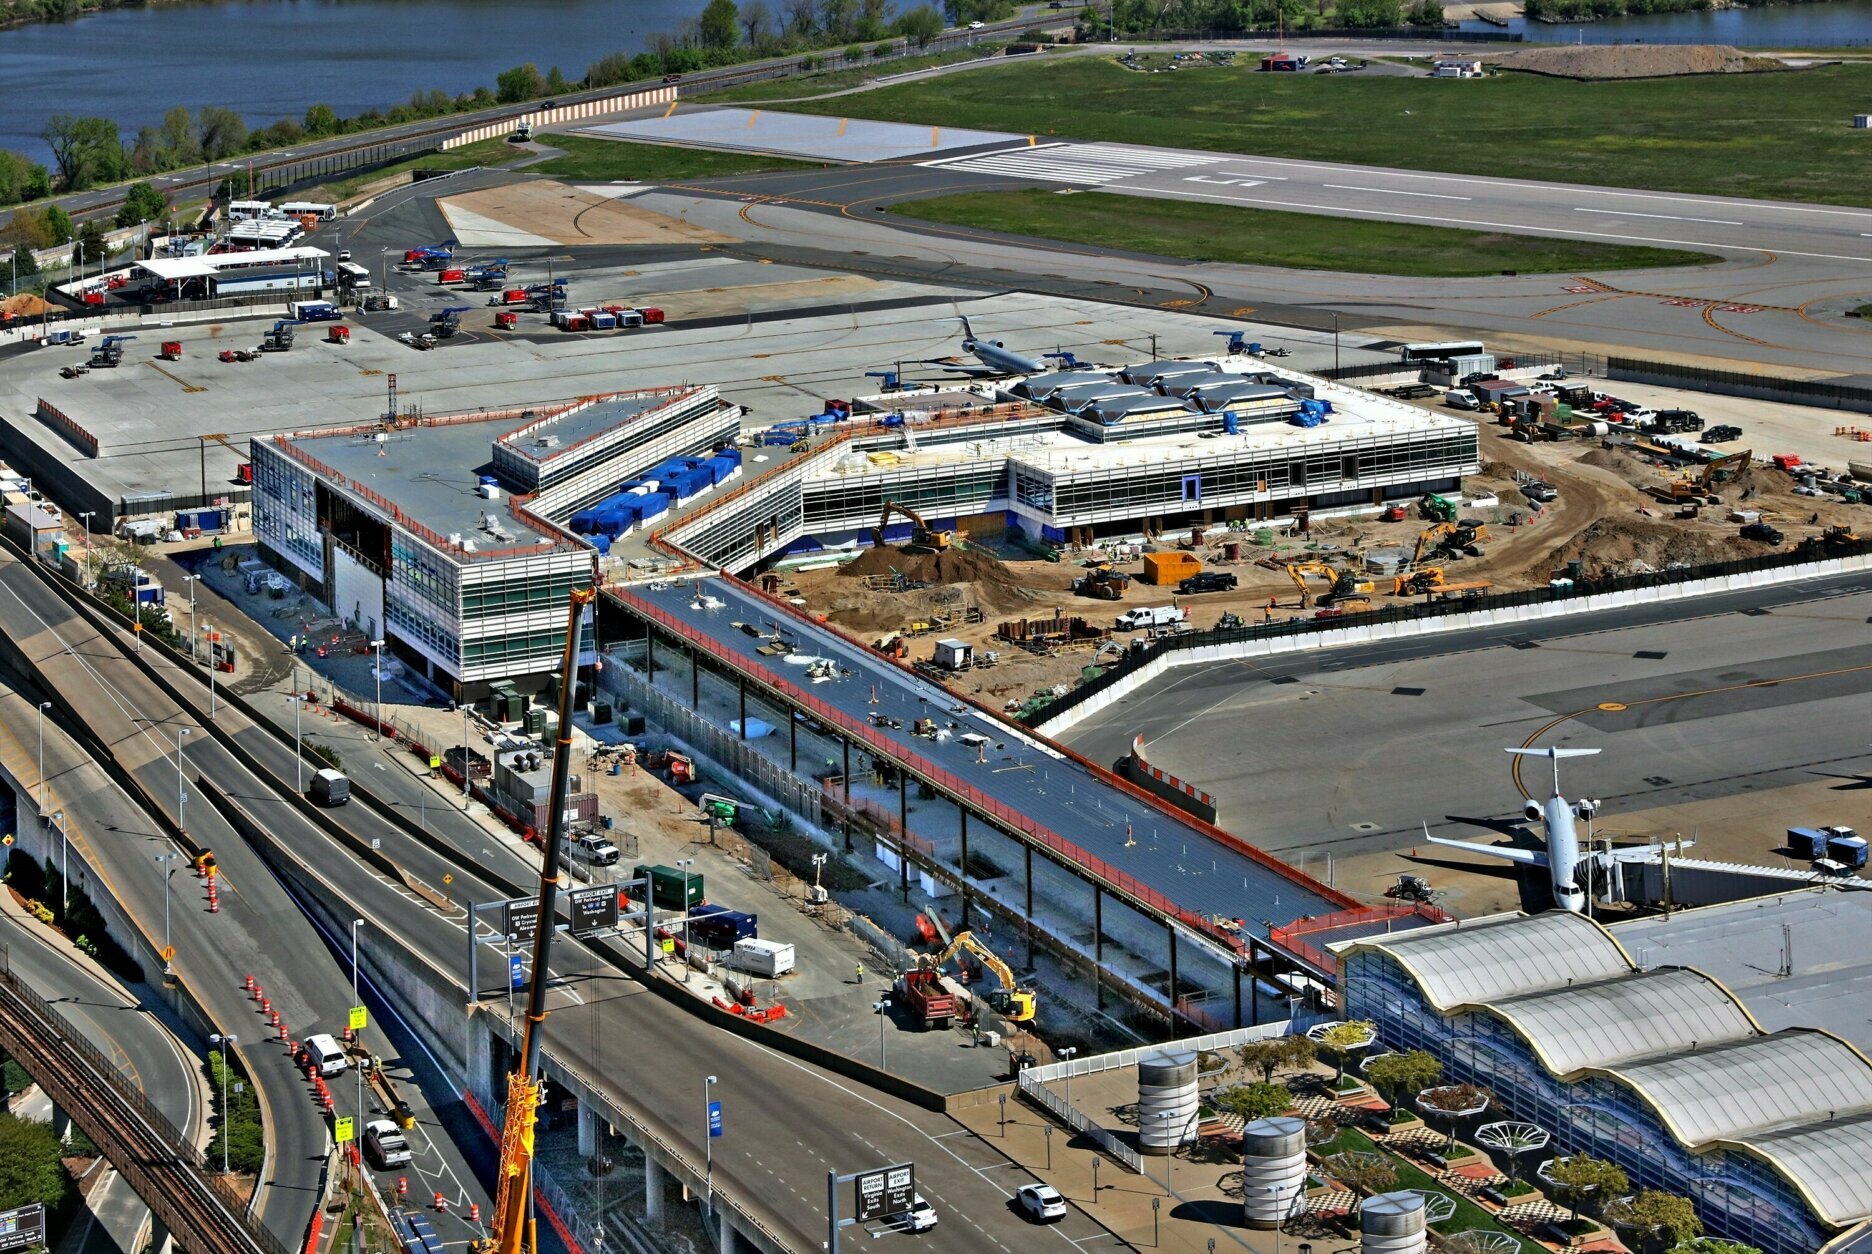 <p>MWAA says overnight work has shifted to day work, with steel frames going up and exterior panels and interior fixtures for the new concourse in place.</p>
